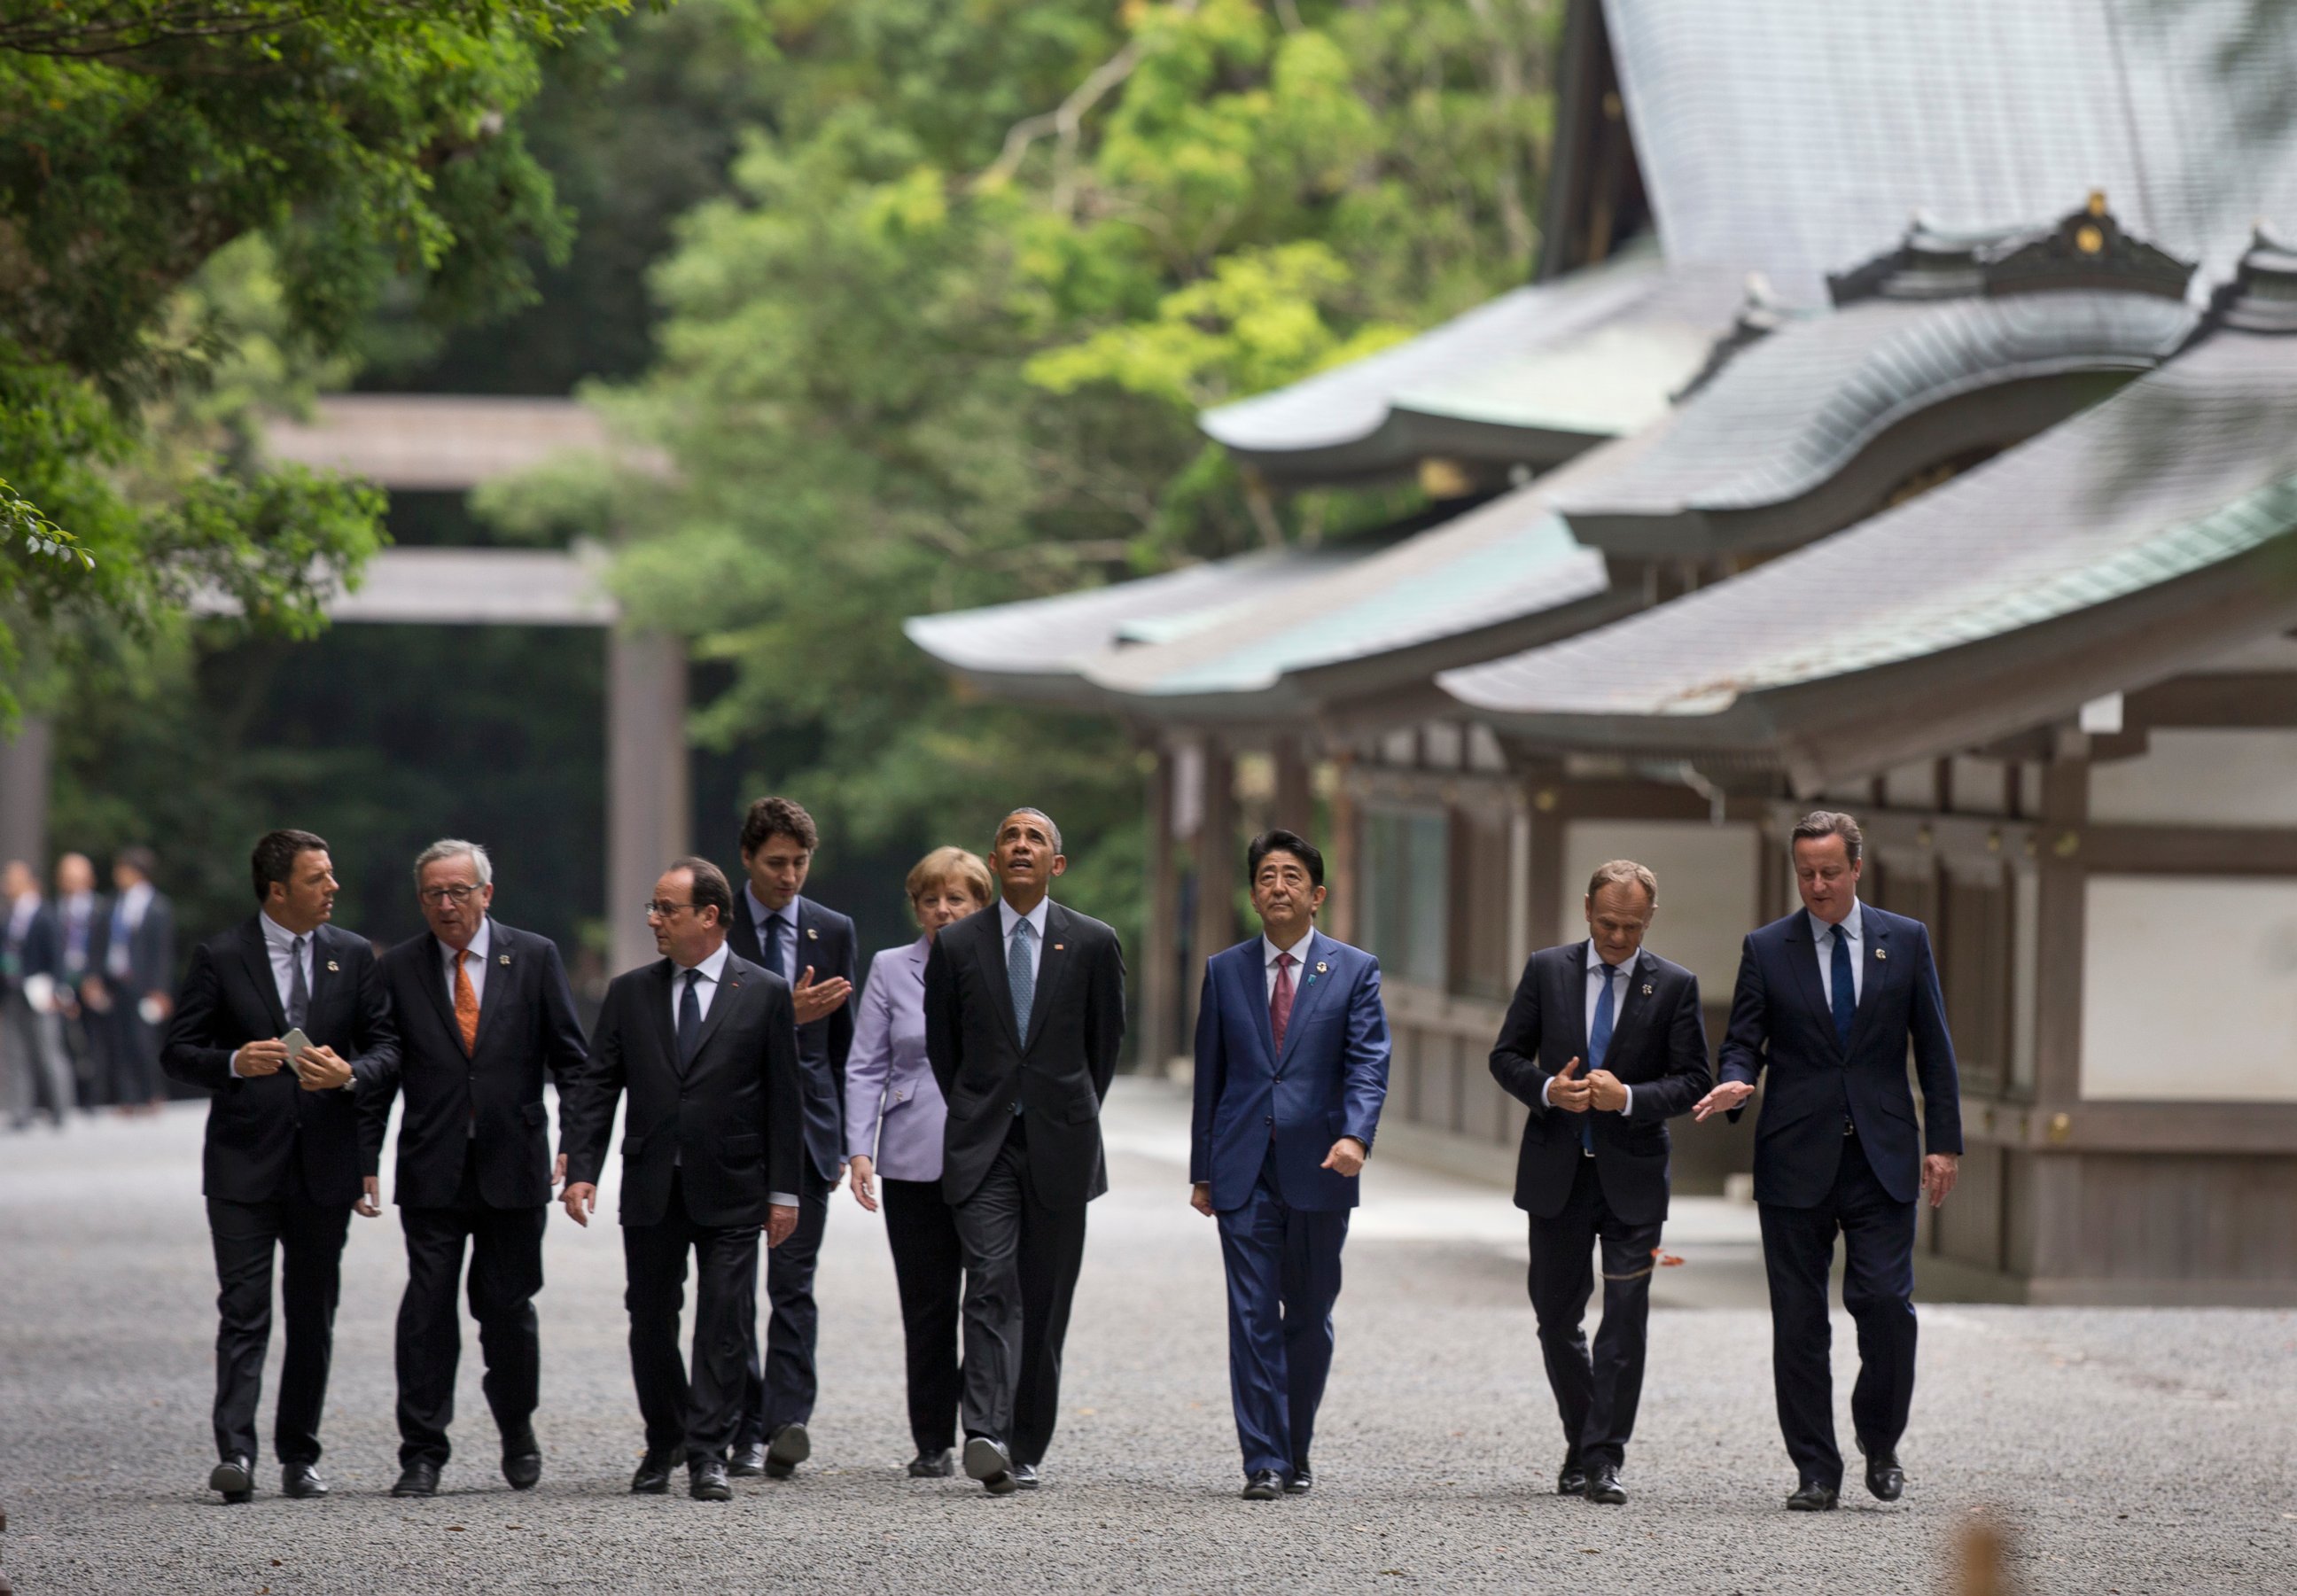 PHOTO: G-7 leaders walk past the Kaguraden as they visit Ise Jingu shrine in Ise, Mie Prefecture, Japan, May 26, 2016, as part of the G-7 Summit.